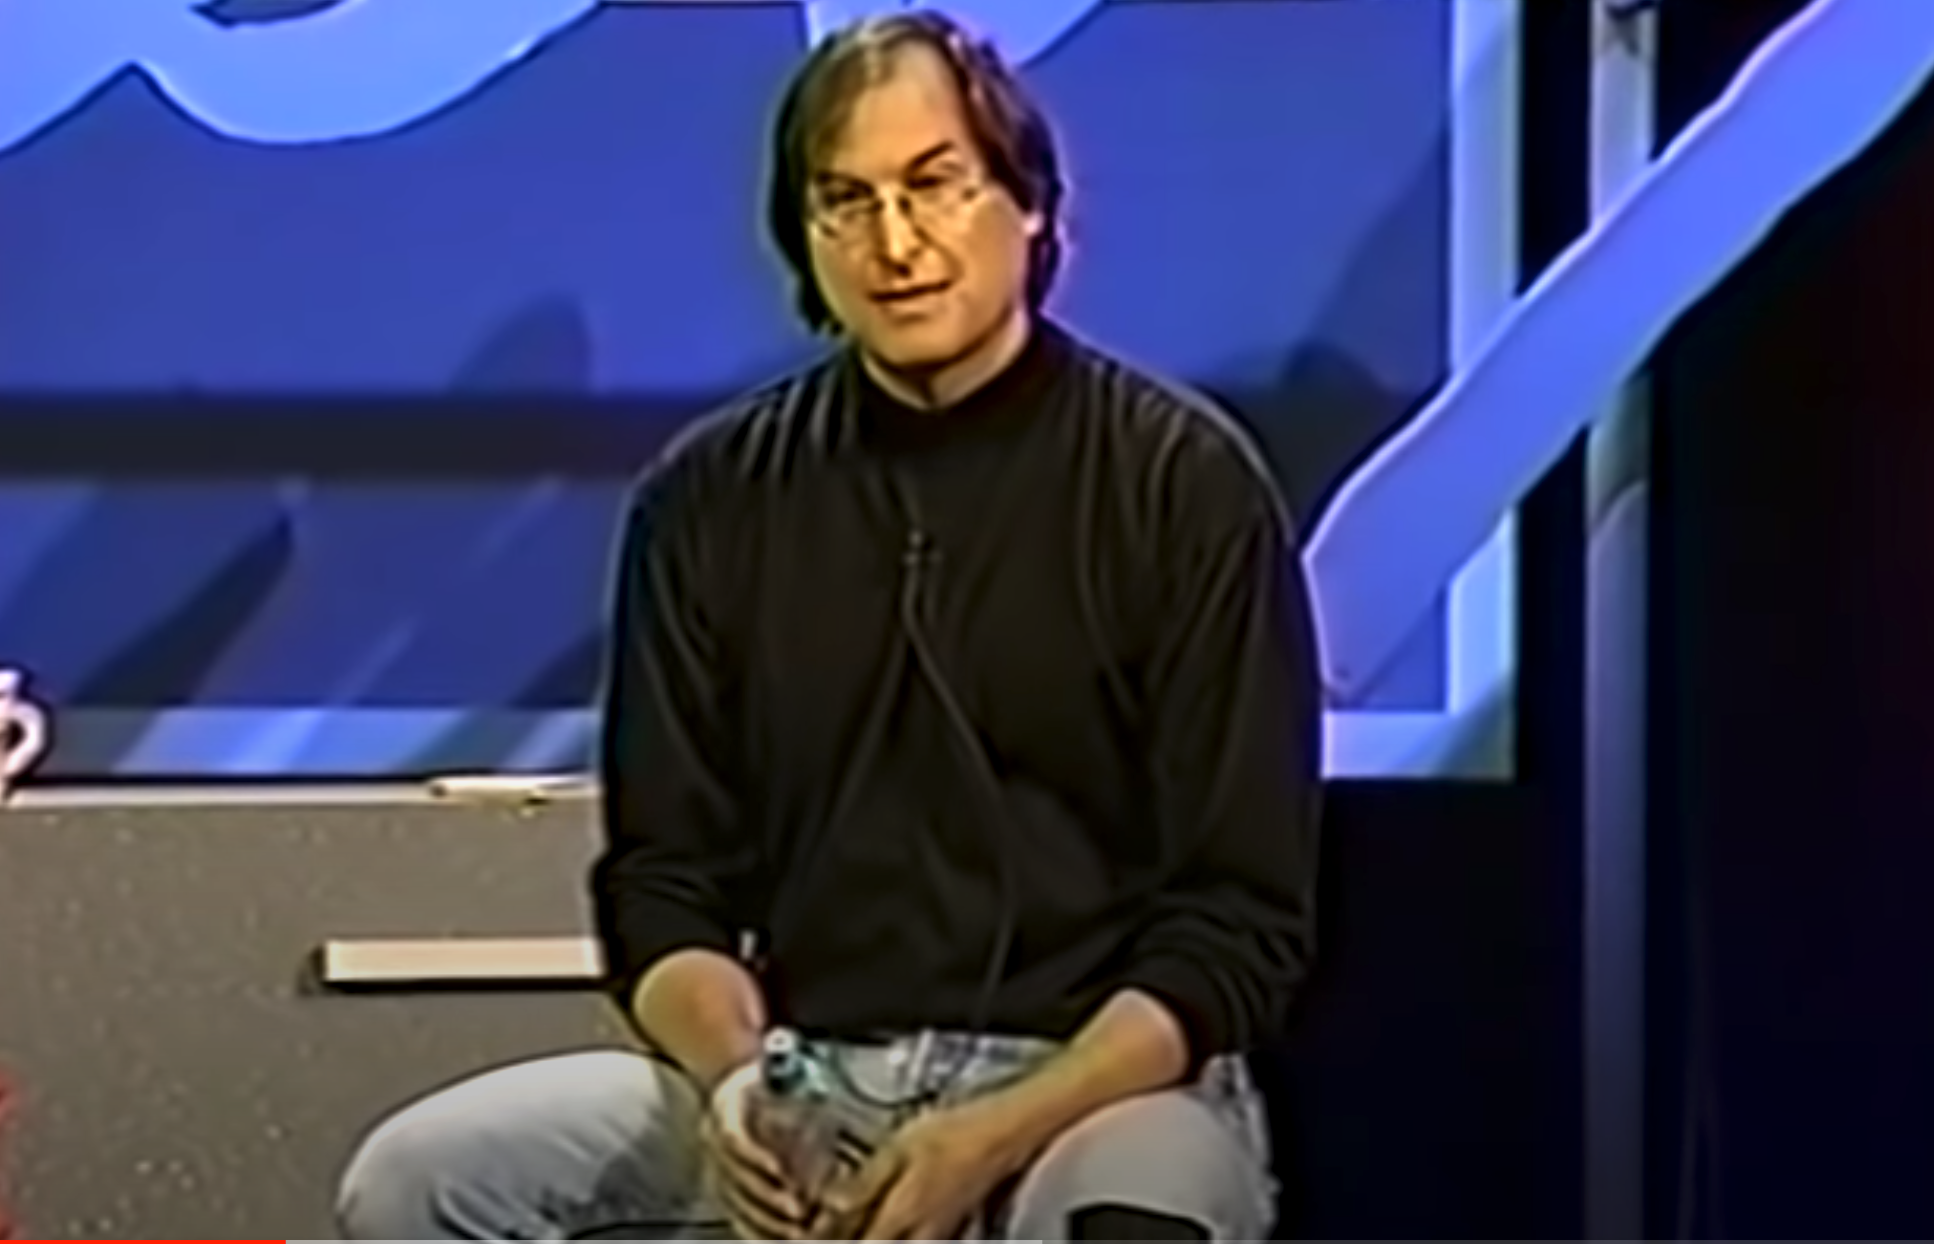 file:img/2020_08_14_what-i-learned-from-steve-jobs-response-to-tech-and-products.org_20200819_180836.png